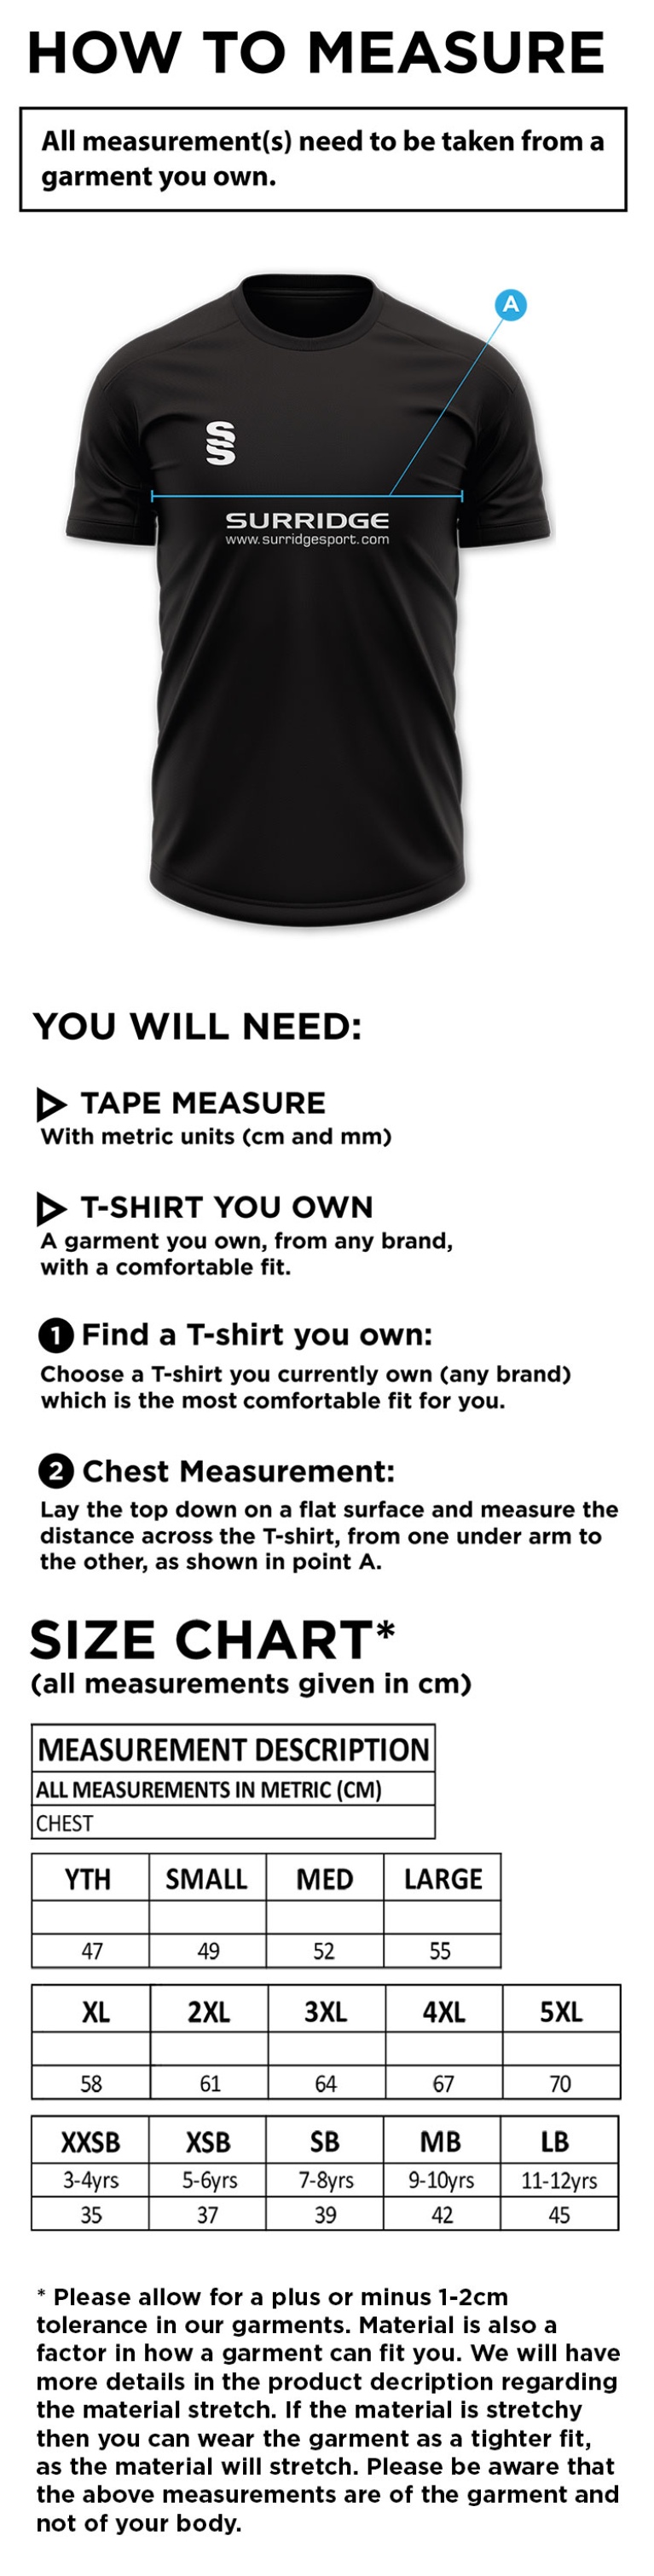 Camo Games Shirt : Red - Size Guide